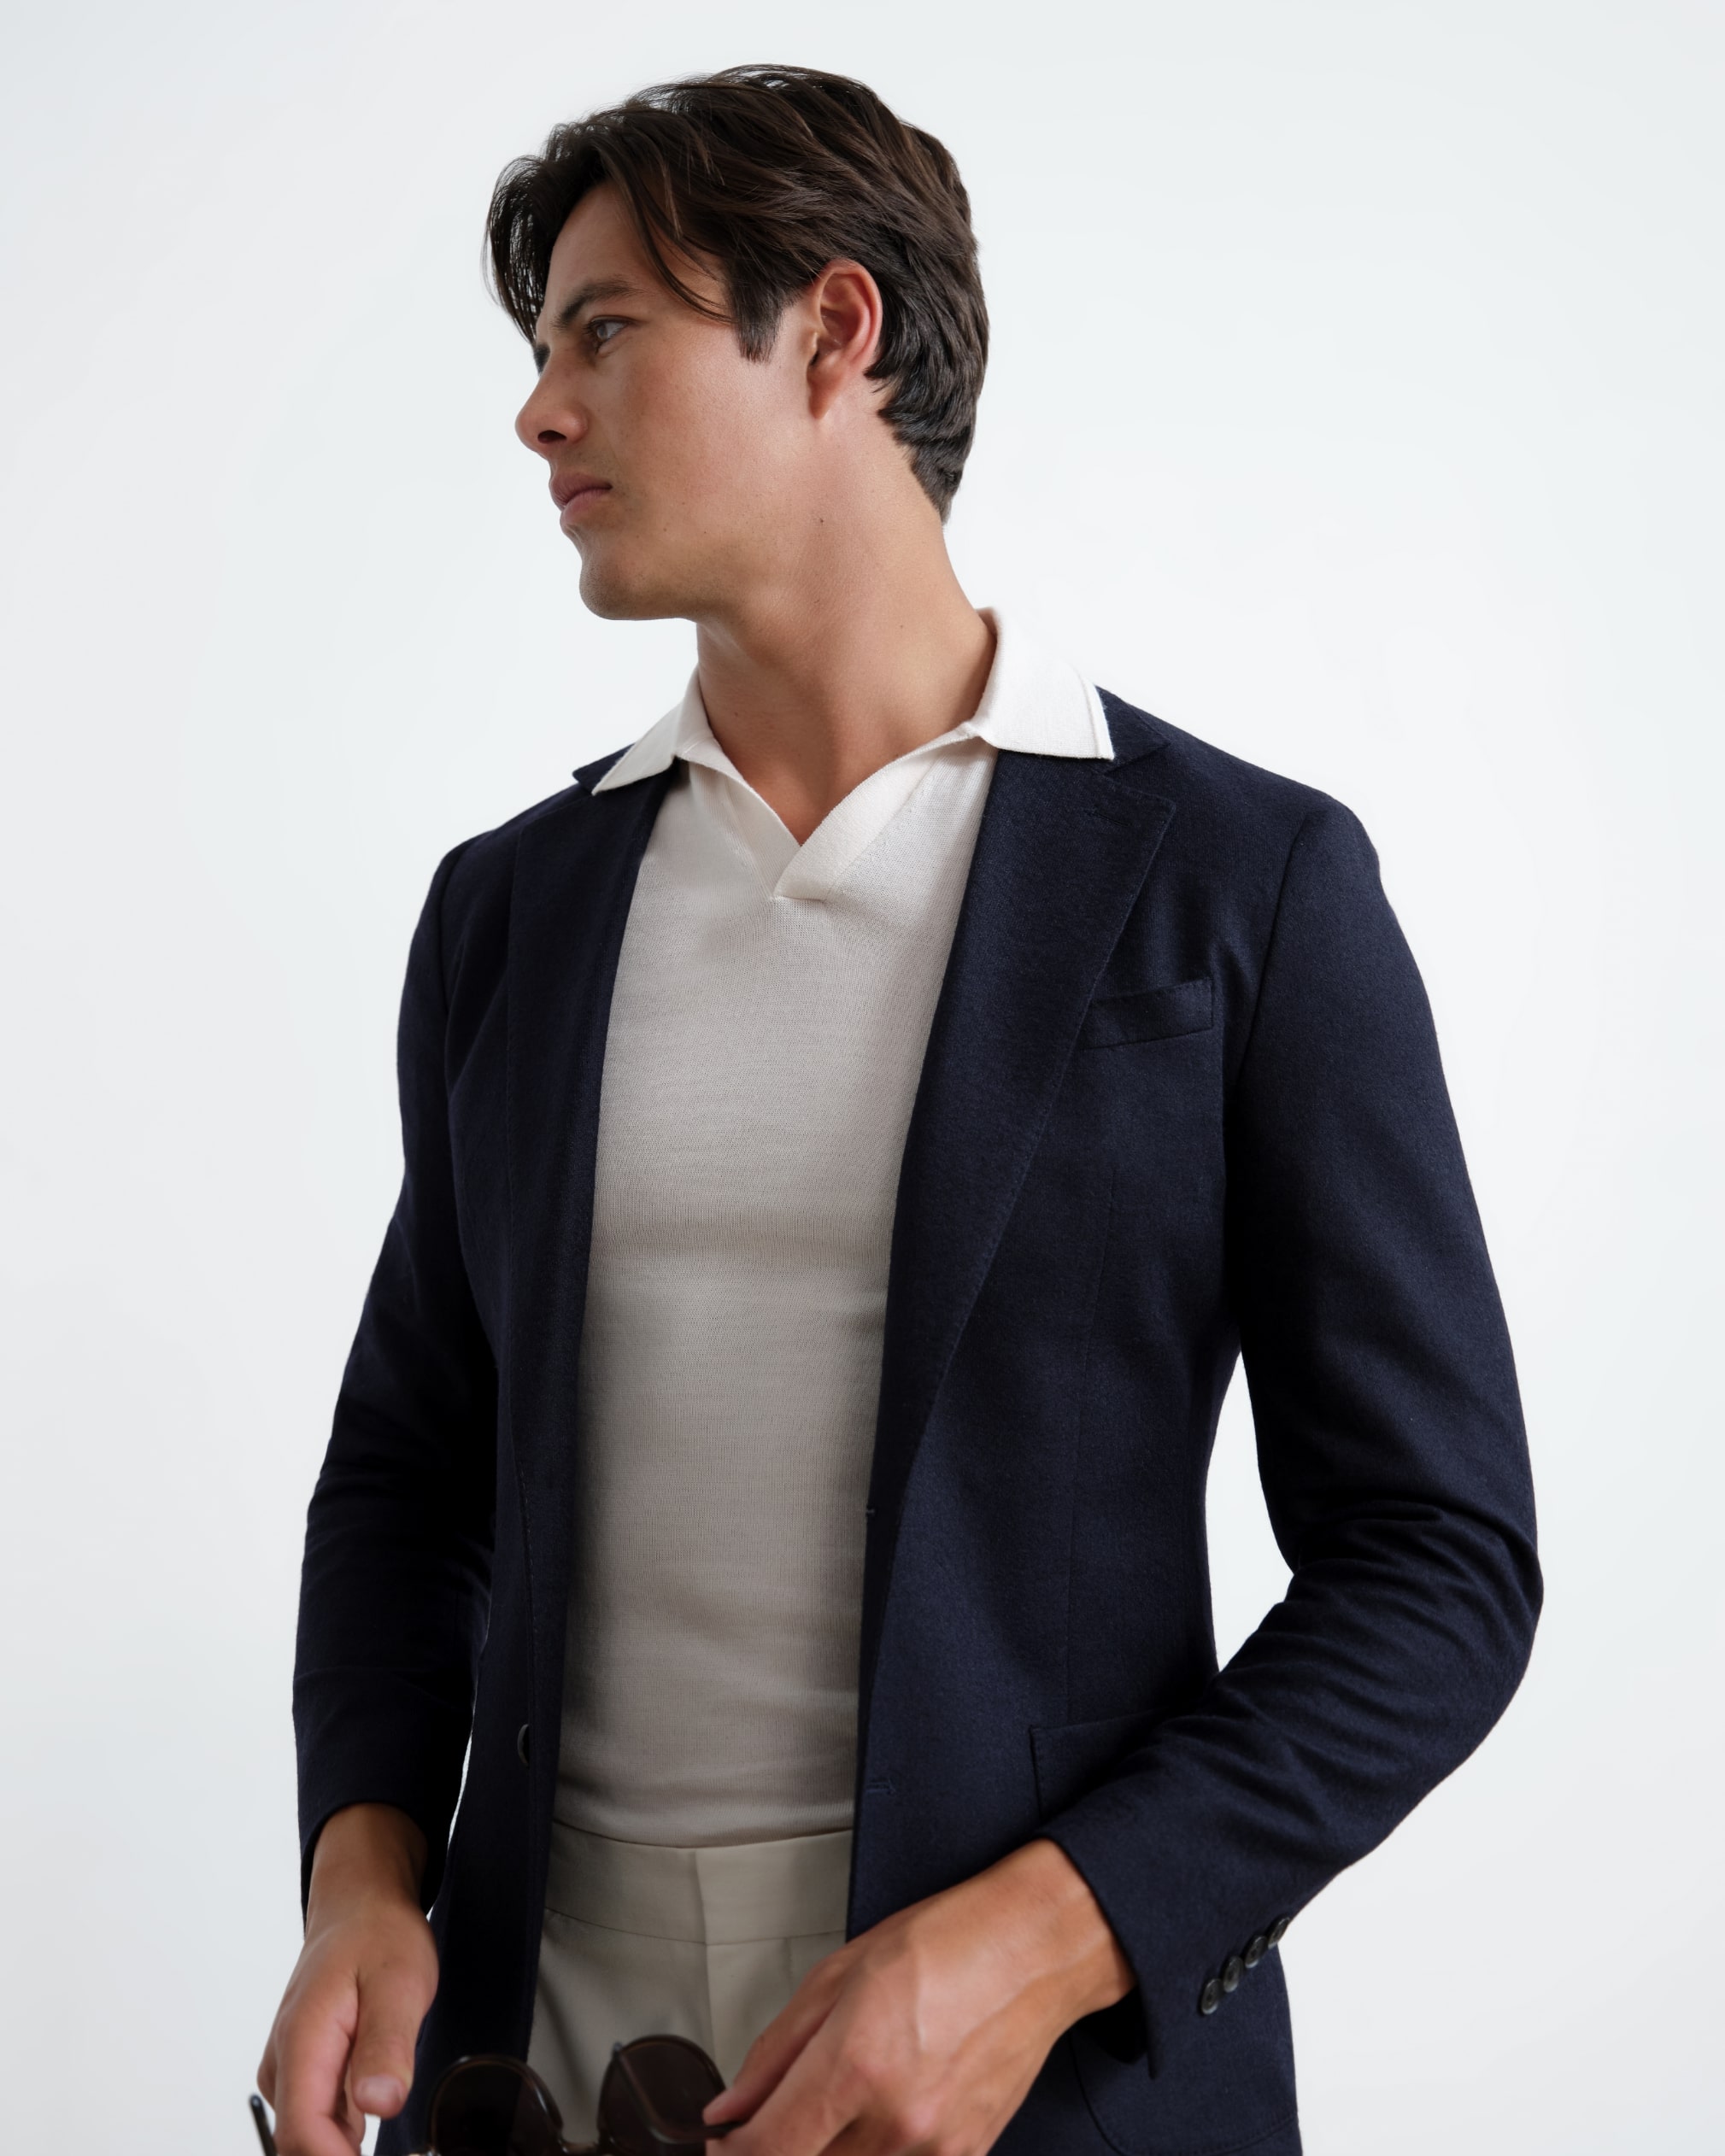 Men's Suits  The Tailored Suit For You - Reiss